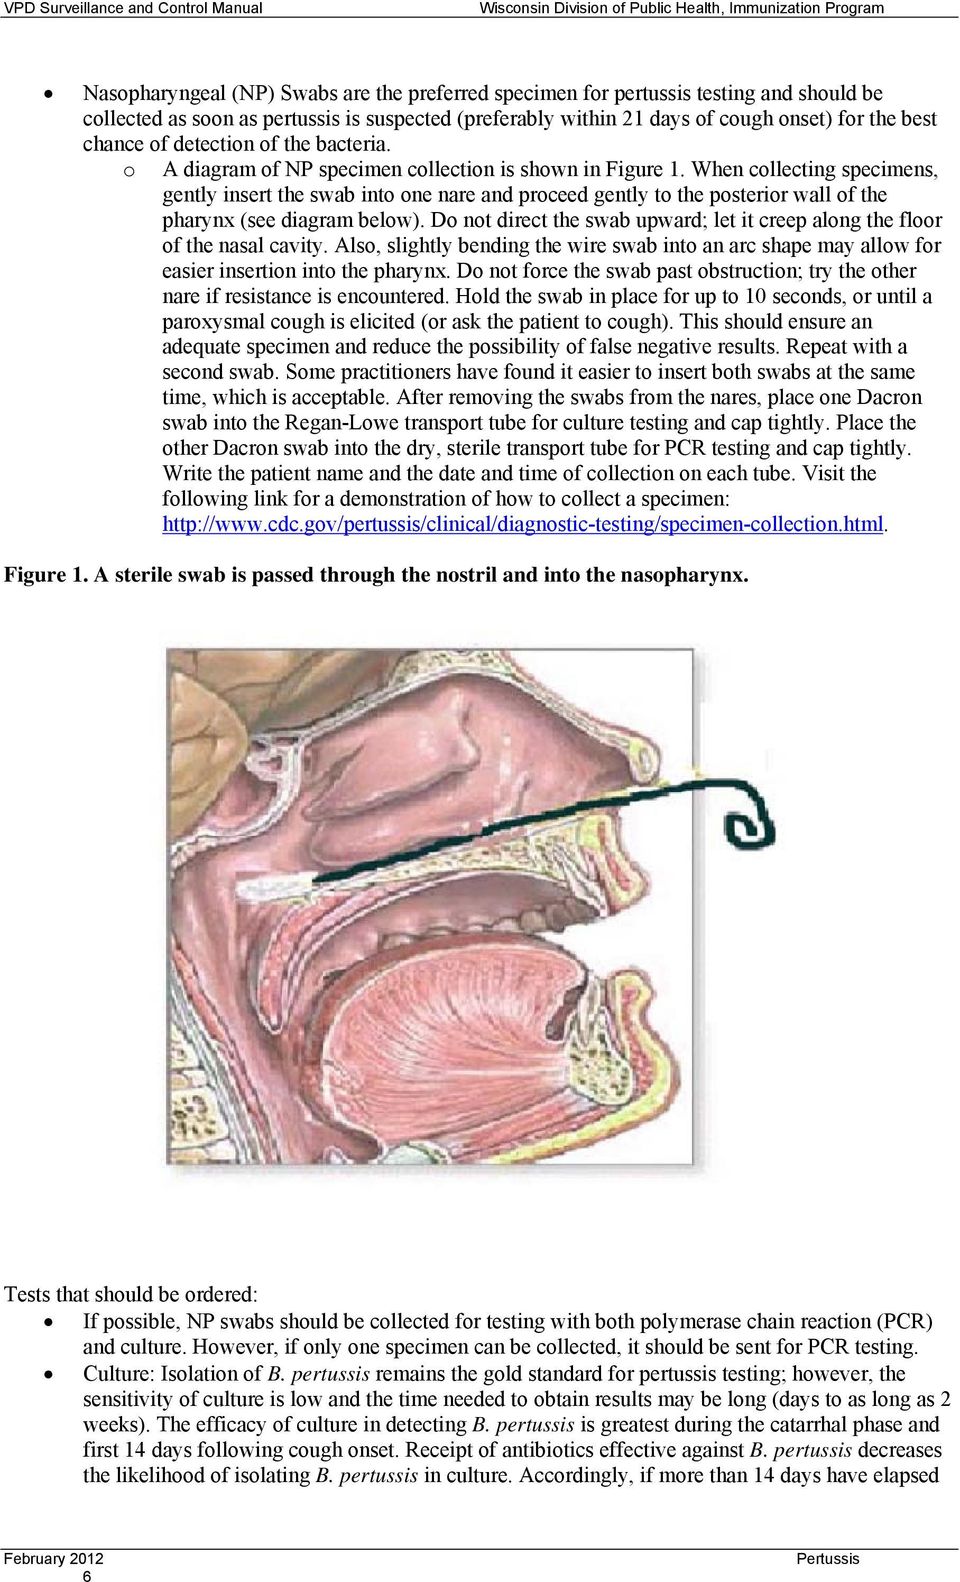 When collecting specimens, gently insert the swab into one nare and proceed gently to the posterior wall of the pharynx (see diagram below).